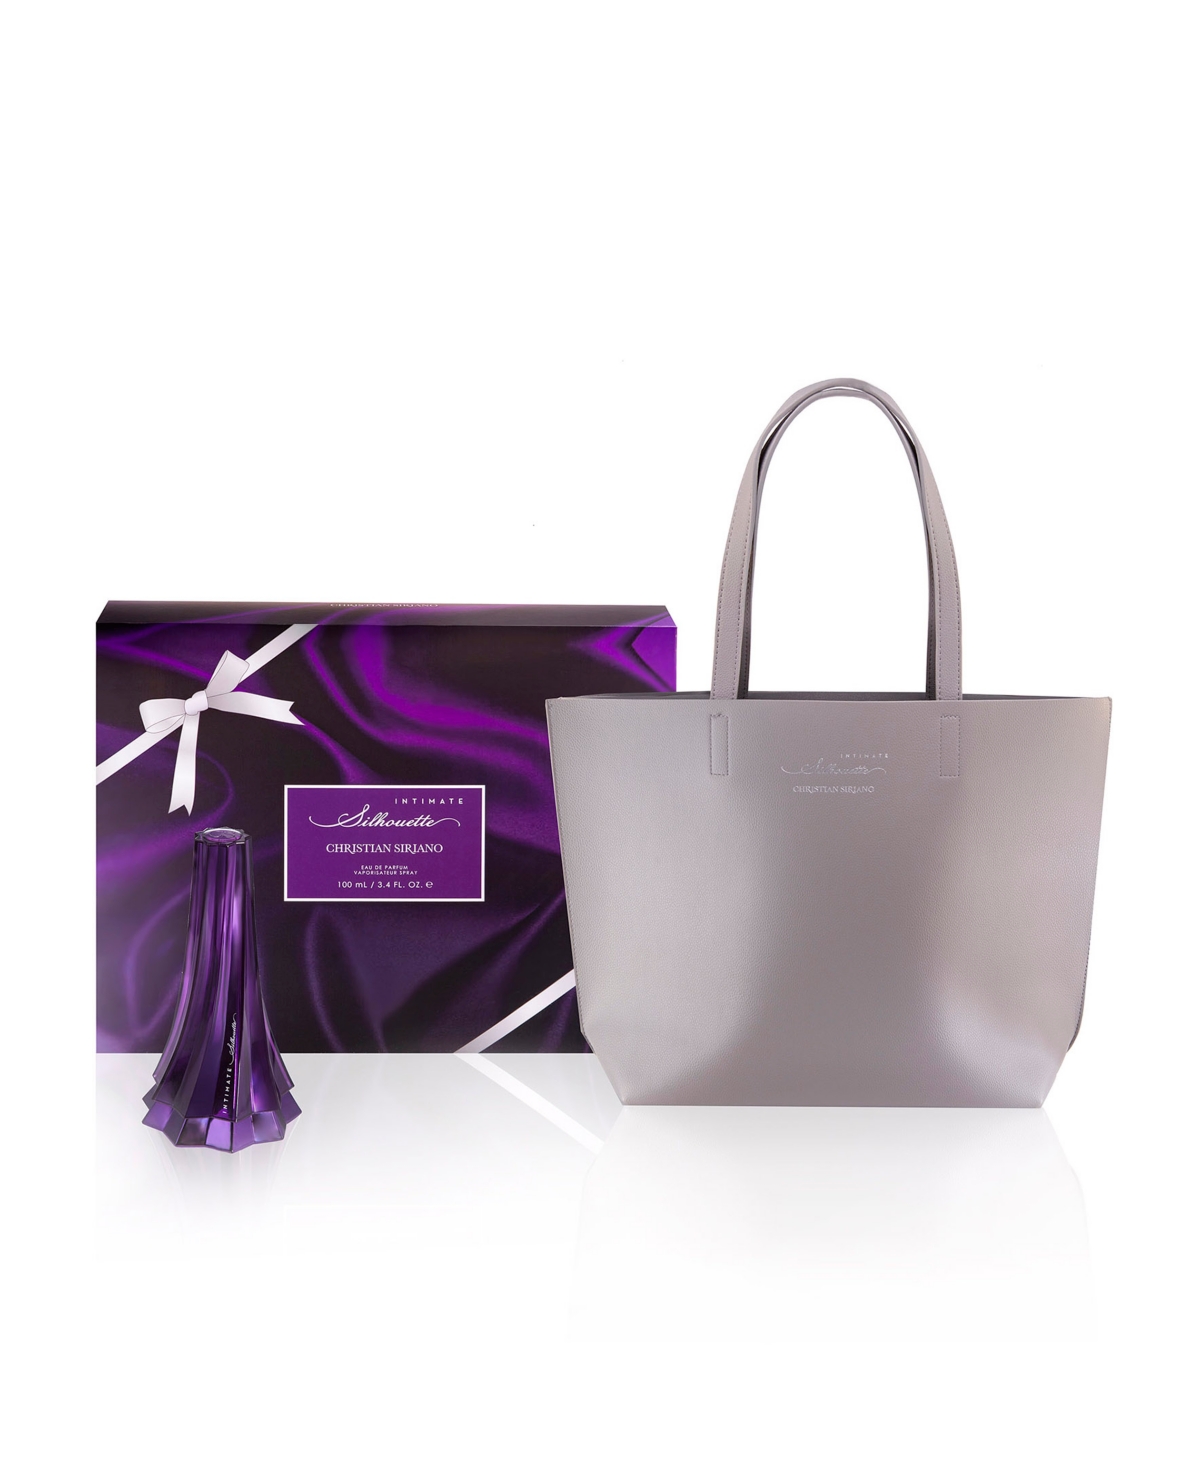 Intimate Silhouette Gift Set for Women, 2 Pieces